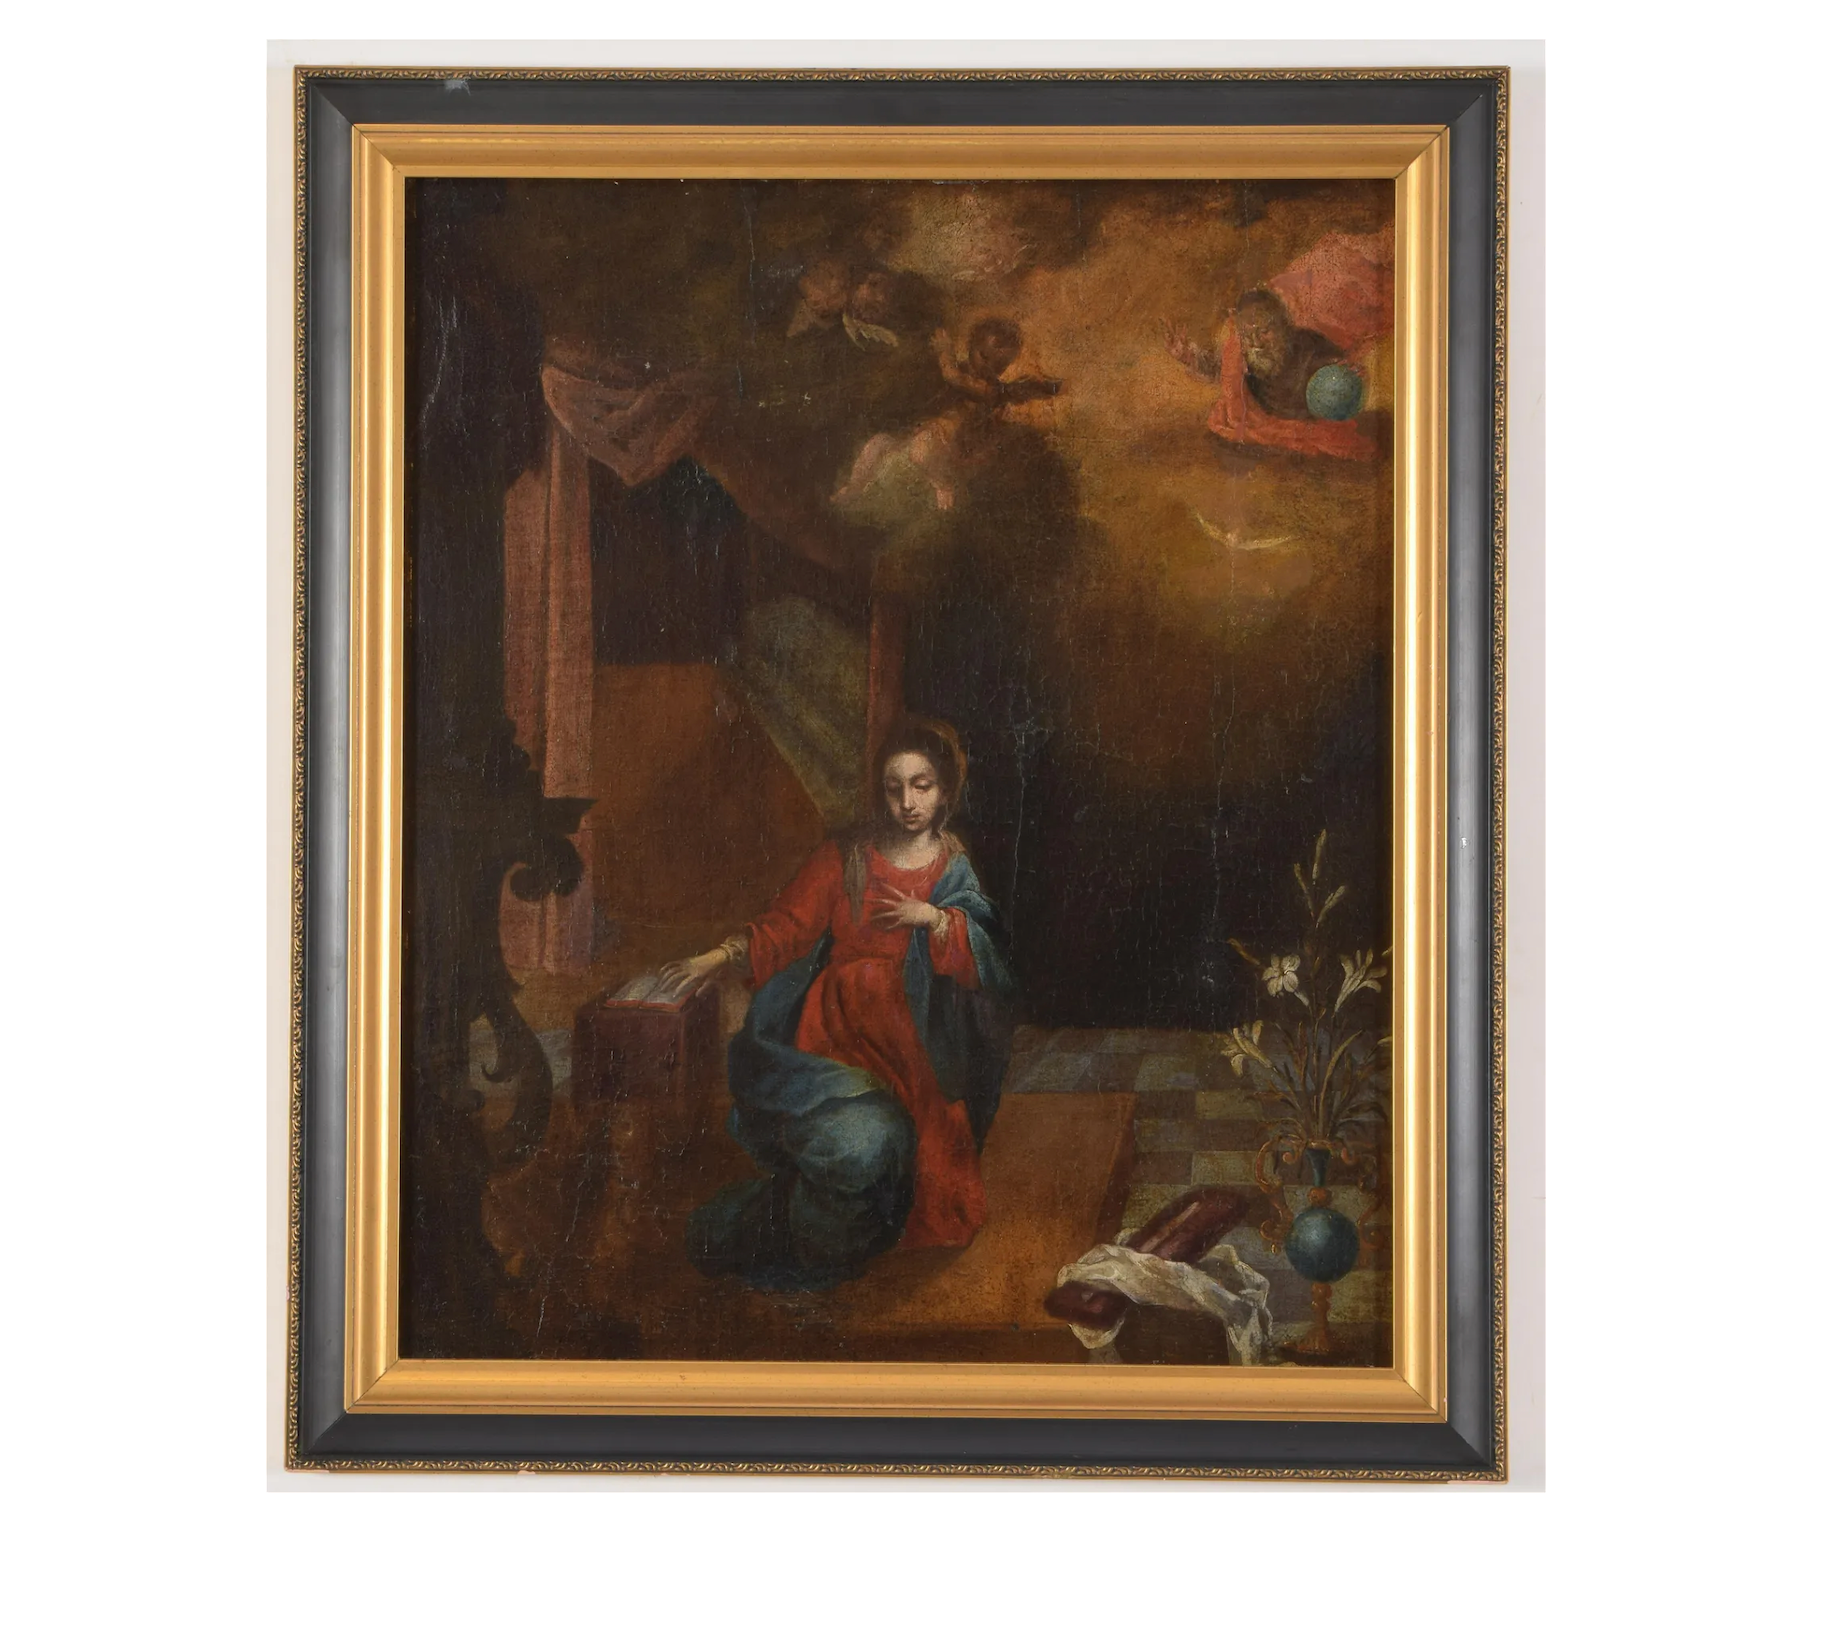 AW606: 18th Century Italian School Old Master - Adoration of Mary - Oil on Canvas Laid to Board